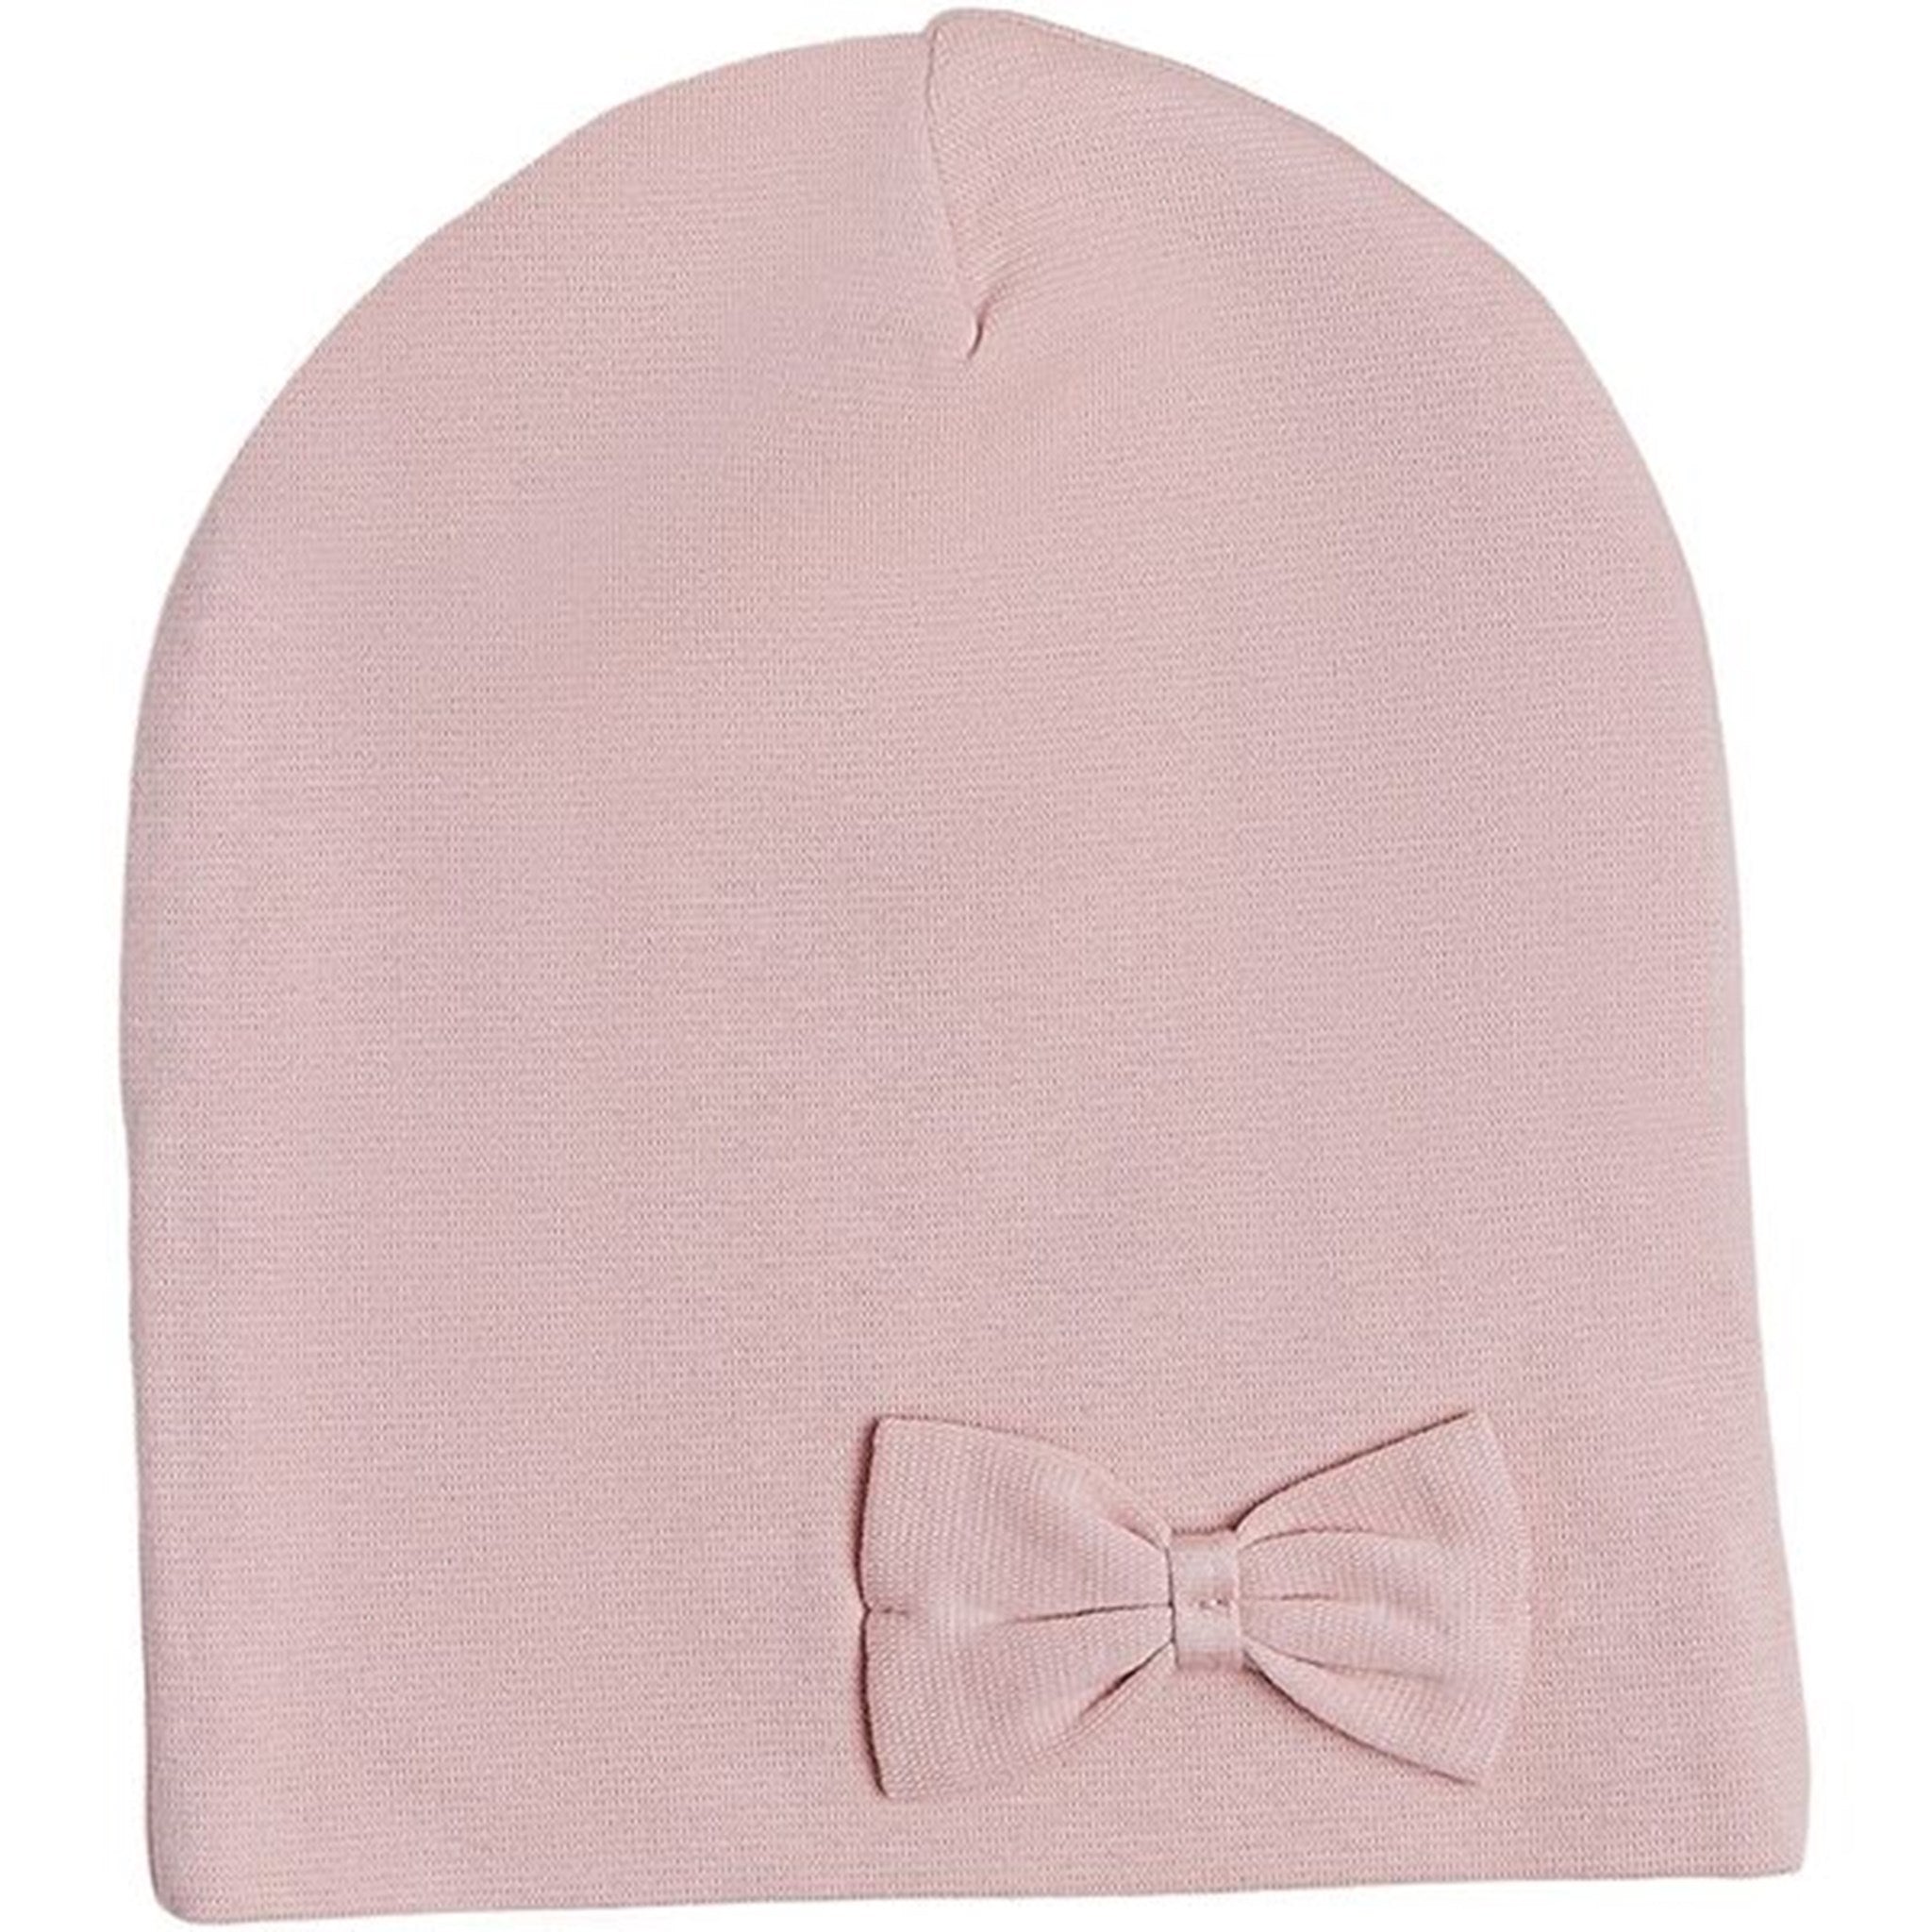 Racing Kids Beanie Windproof 2-layer Bow Cameo Rose